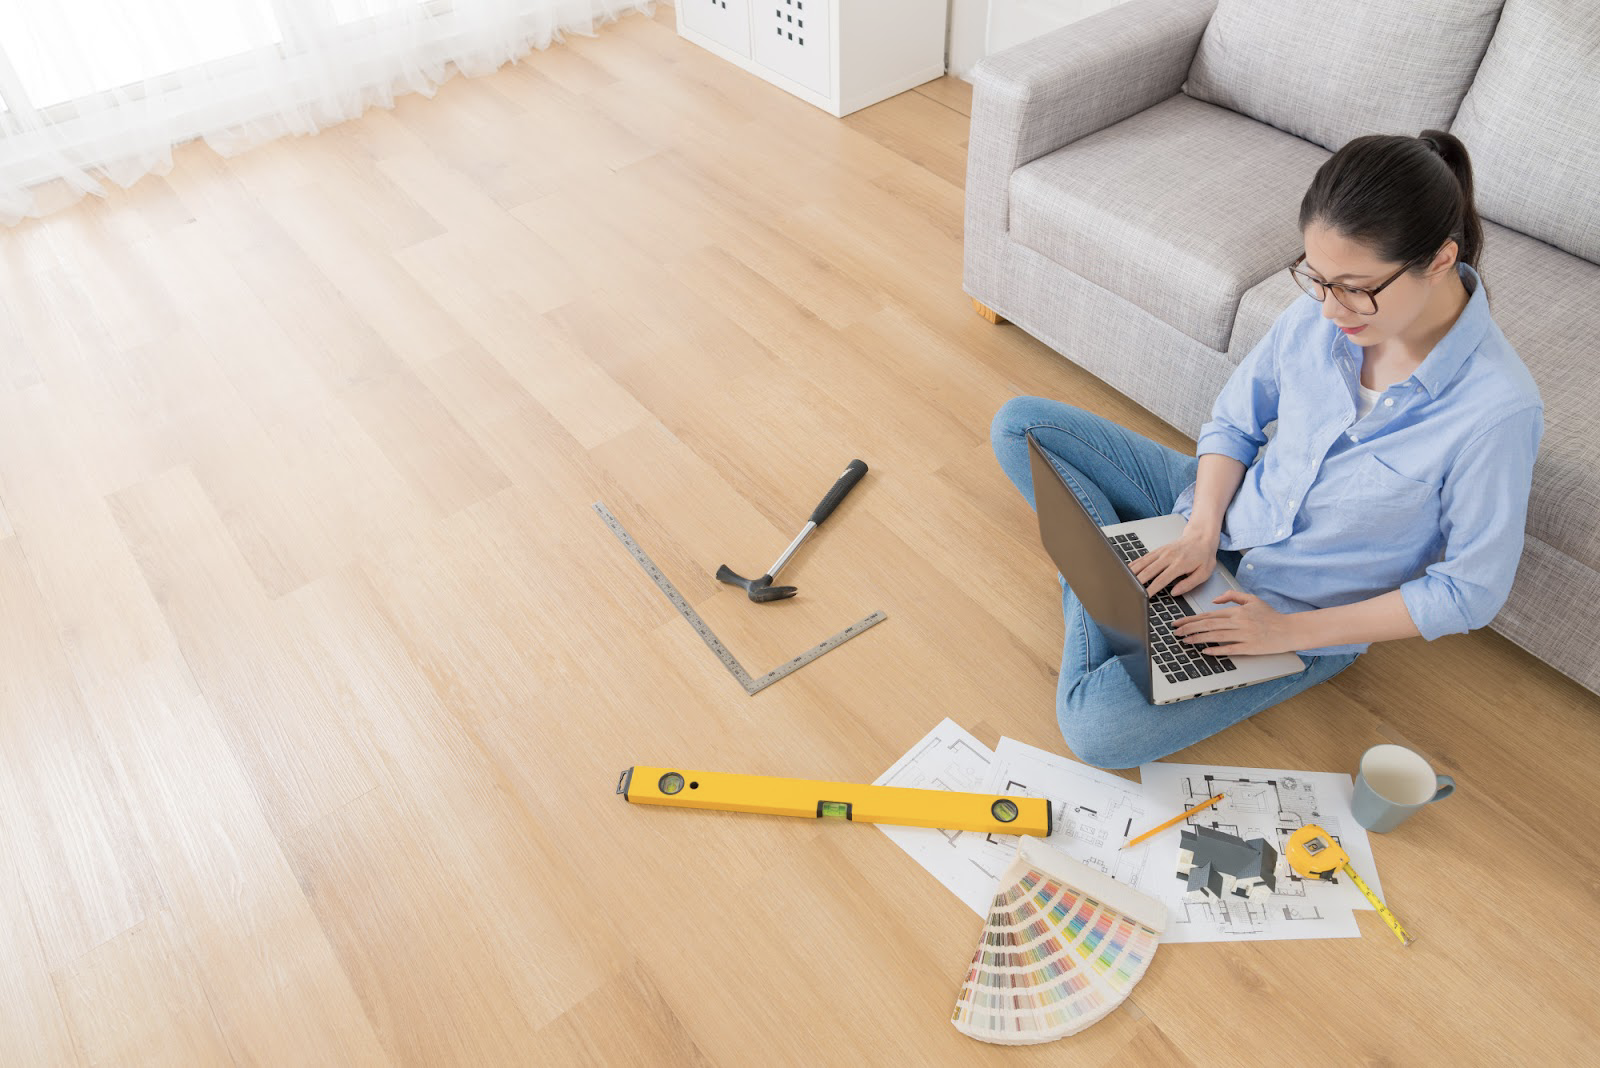 20 Home Renovation Mistakes to Avoid